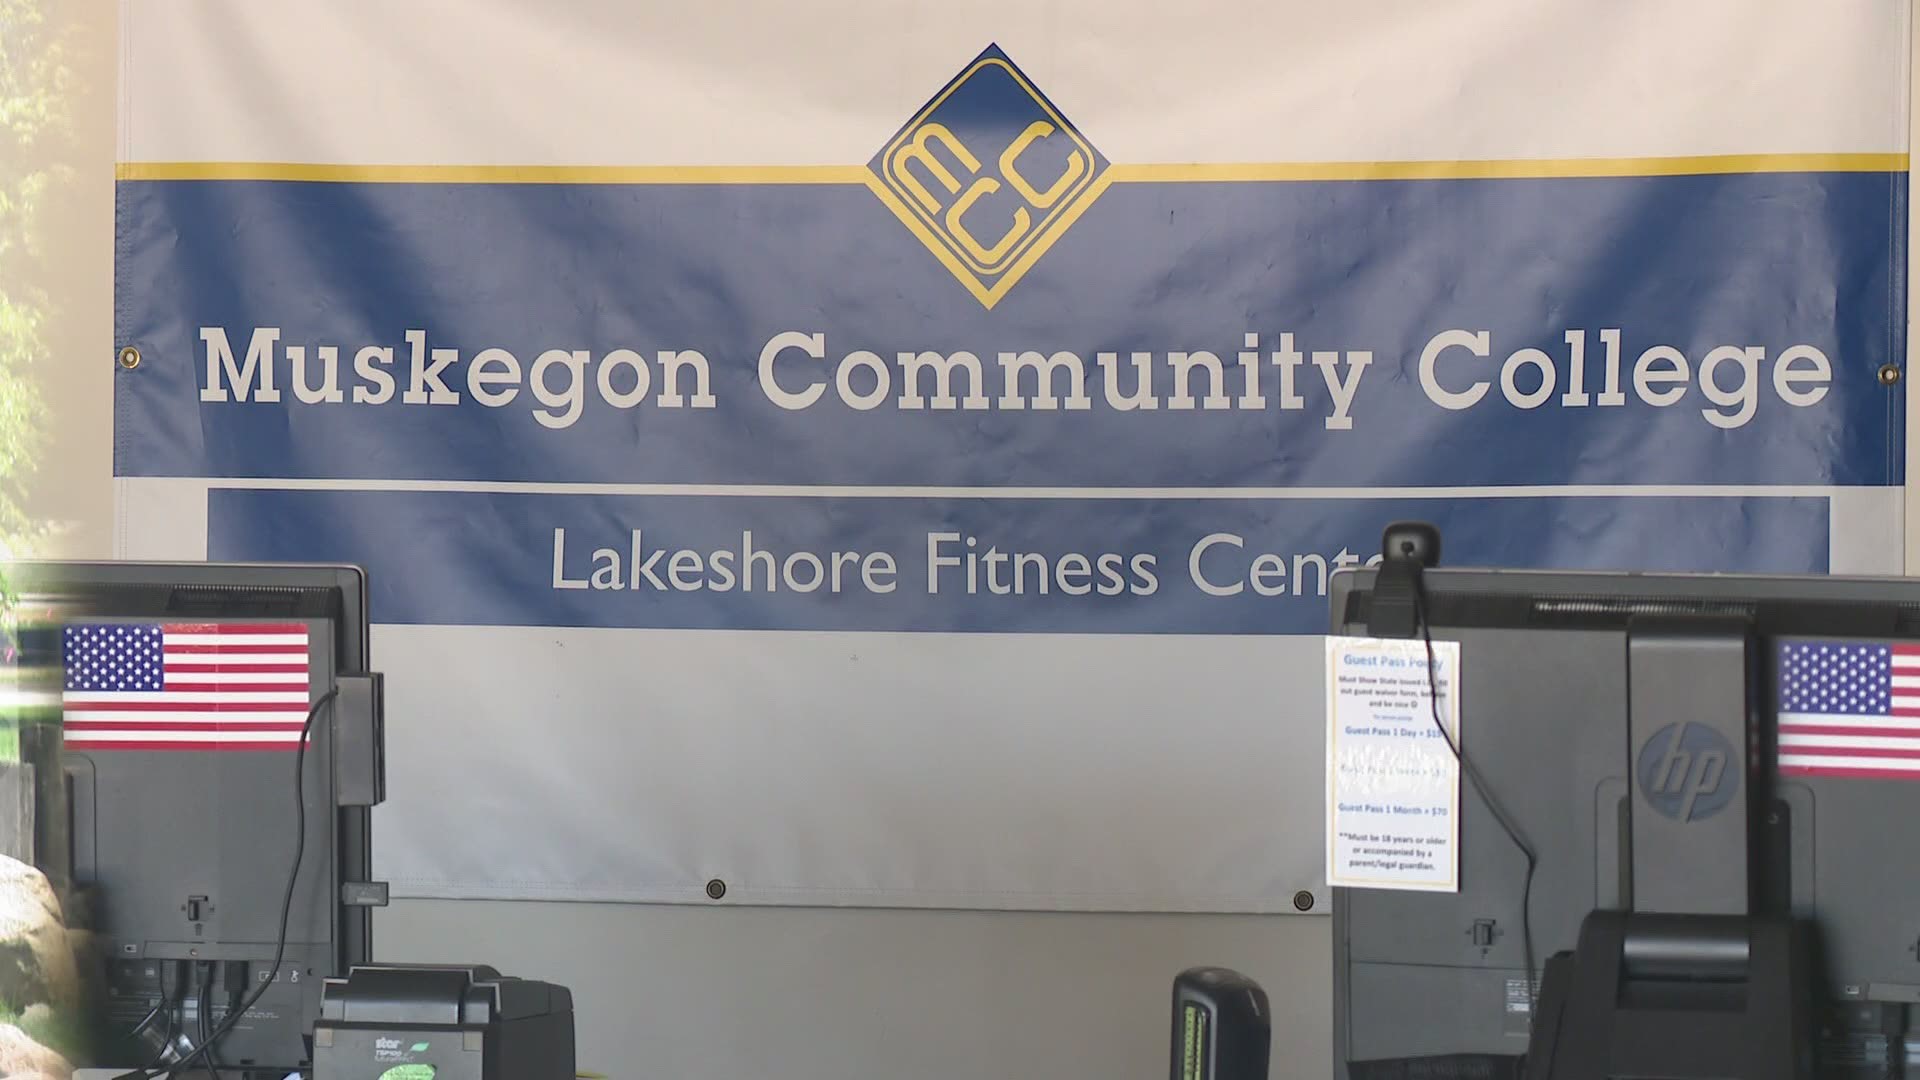 MCC's Board of Trustees are looking for a temporary operator to reopen the Lakeshore Fitness Center for six-months, from September to February.